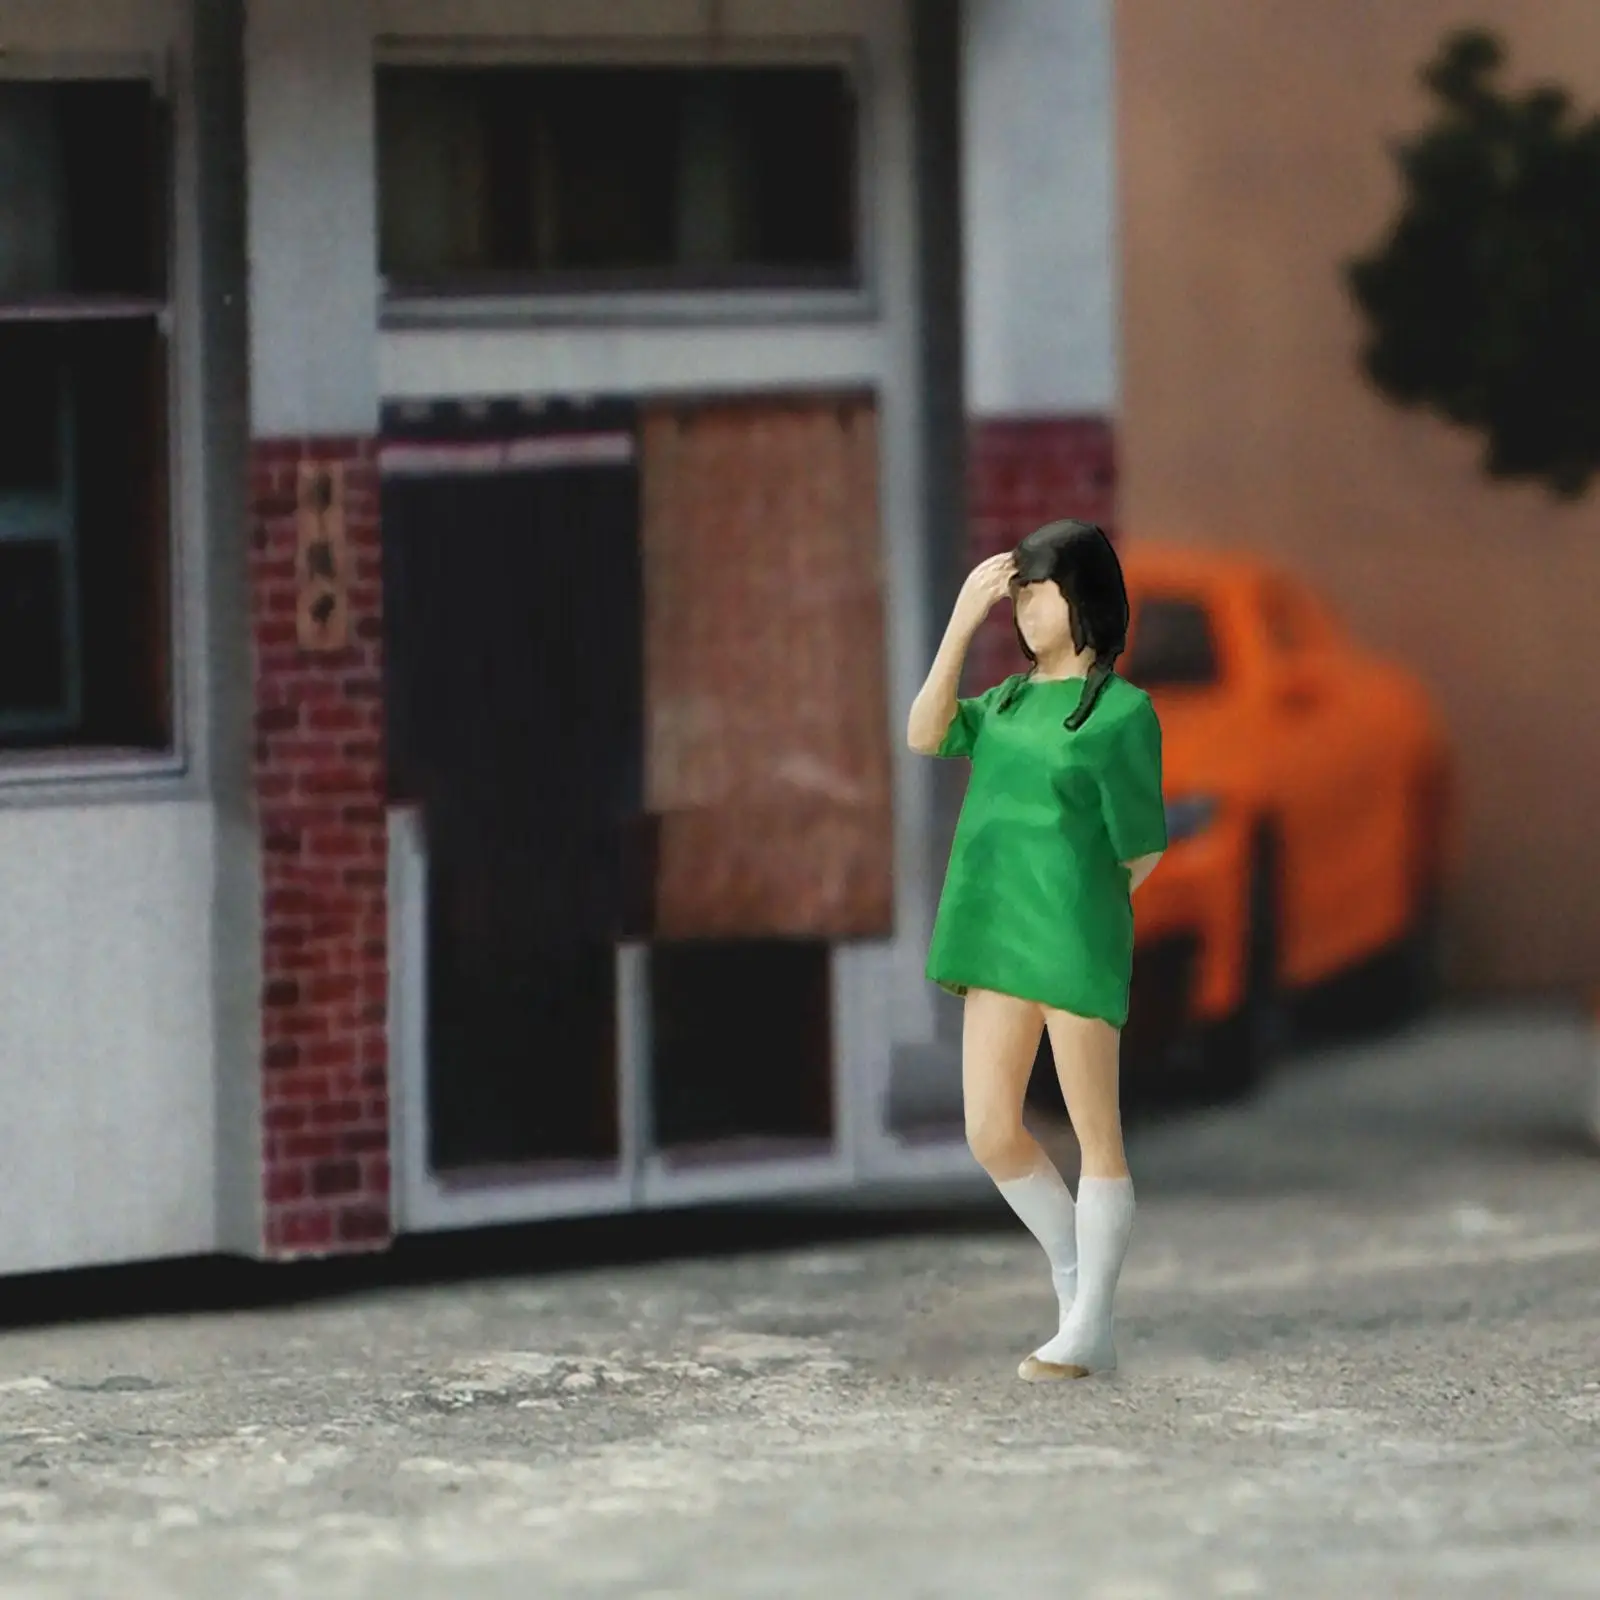 1/64 Scale People Figures Train Park Street People Figures Resin for Diorama Dollhouse Photography Props Scenery Landscape Decor